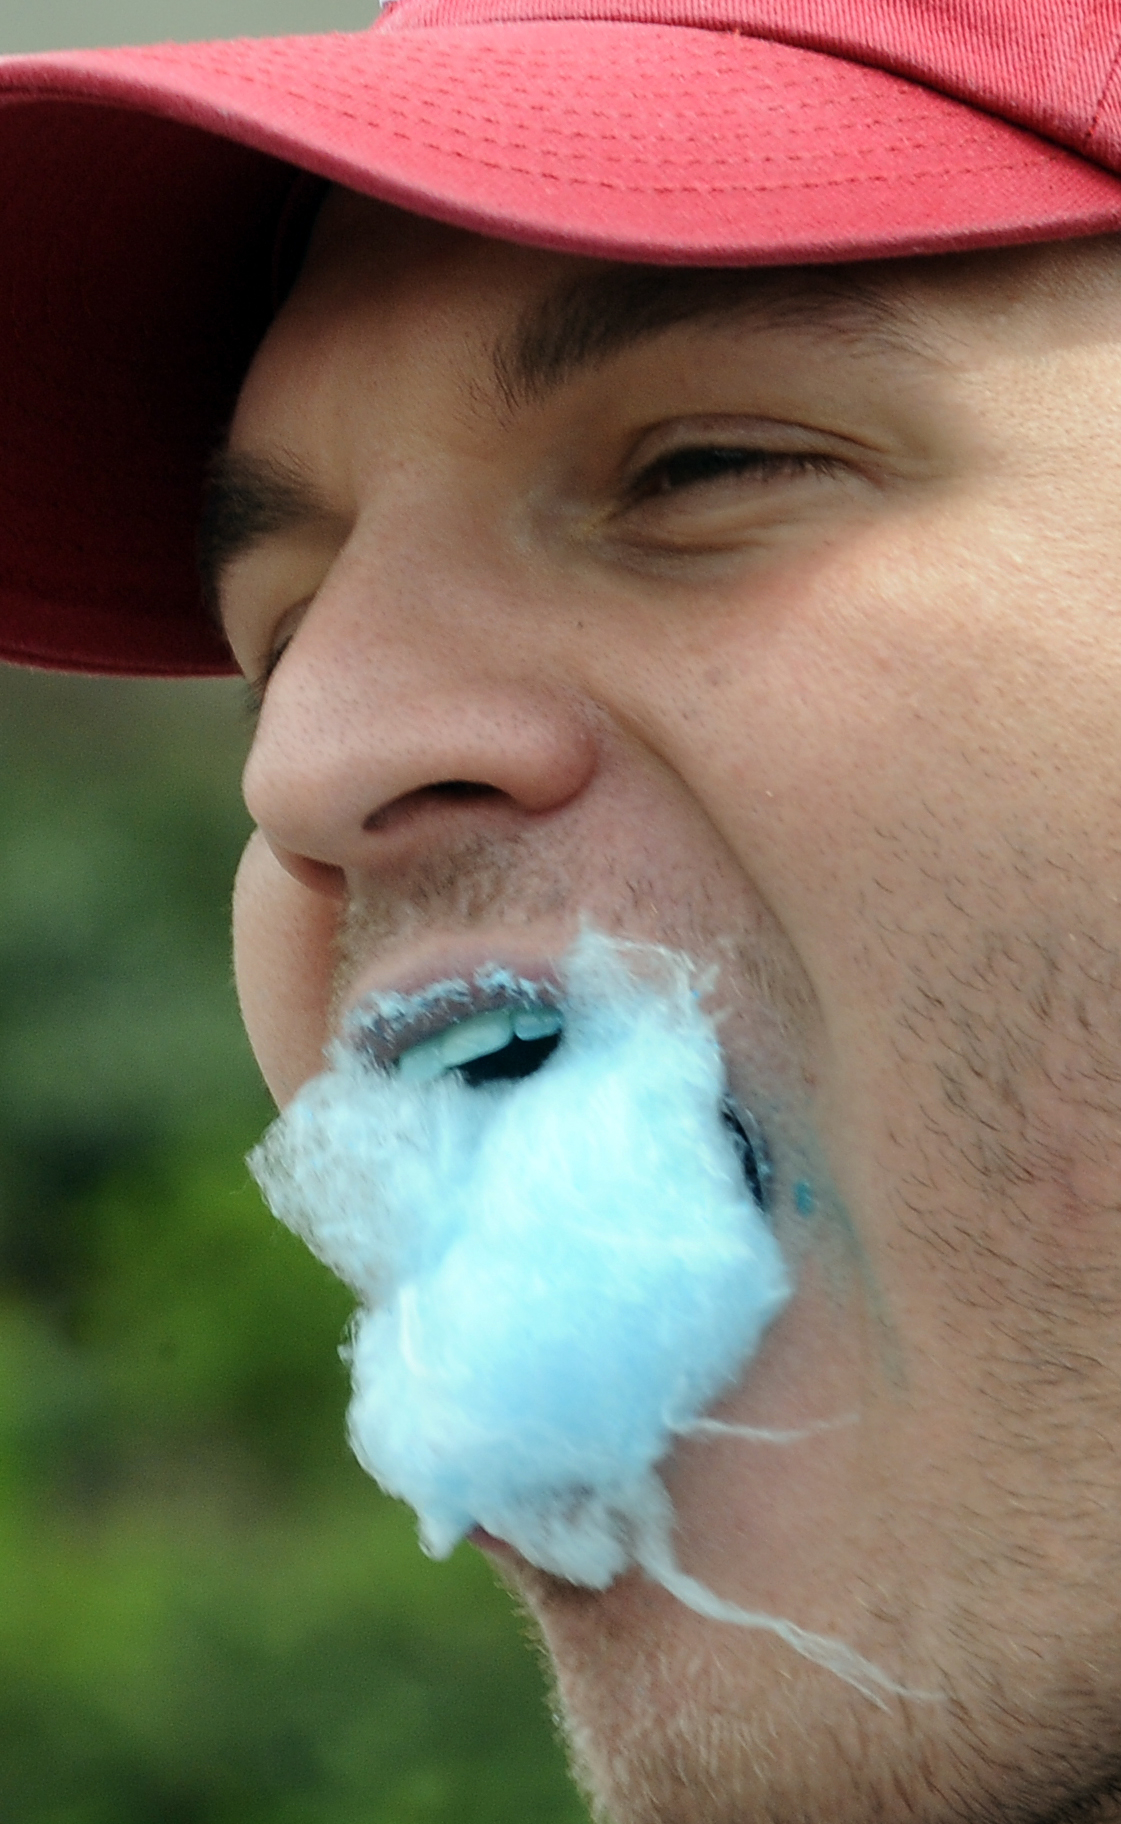 Close-up of a person eating cotton candy